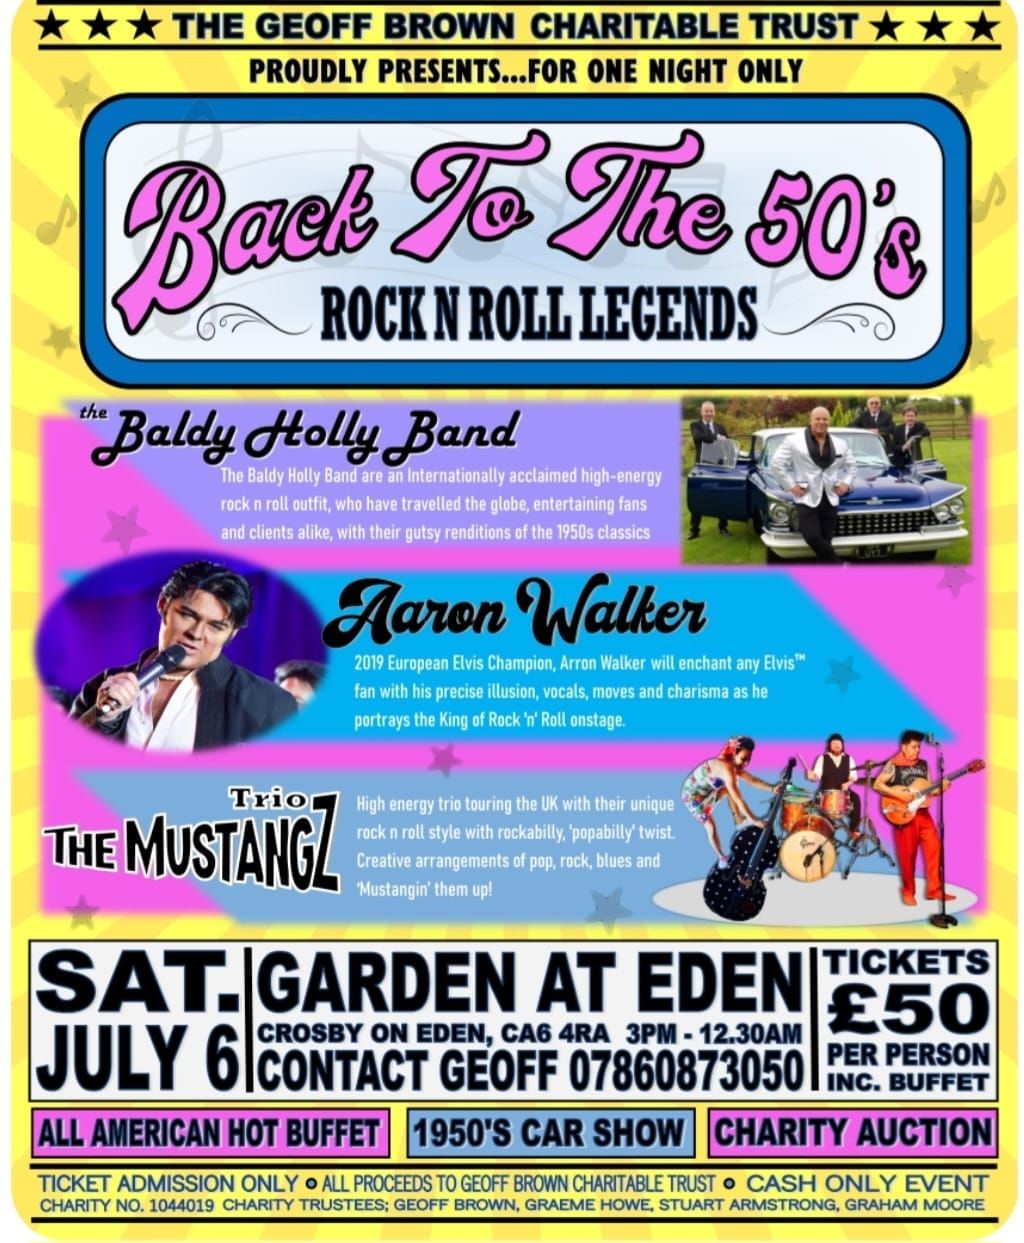 Back to the 50s Rock n Roll Legends show